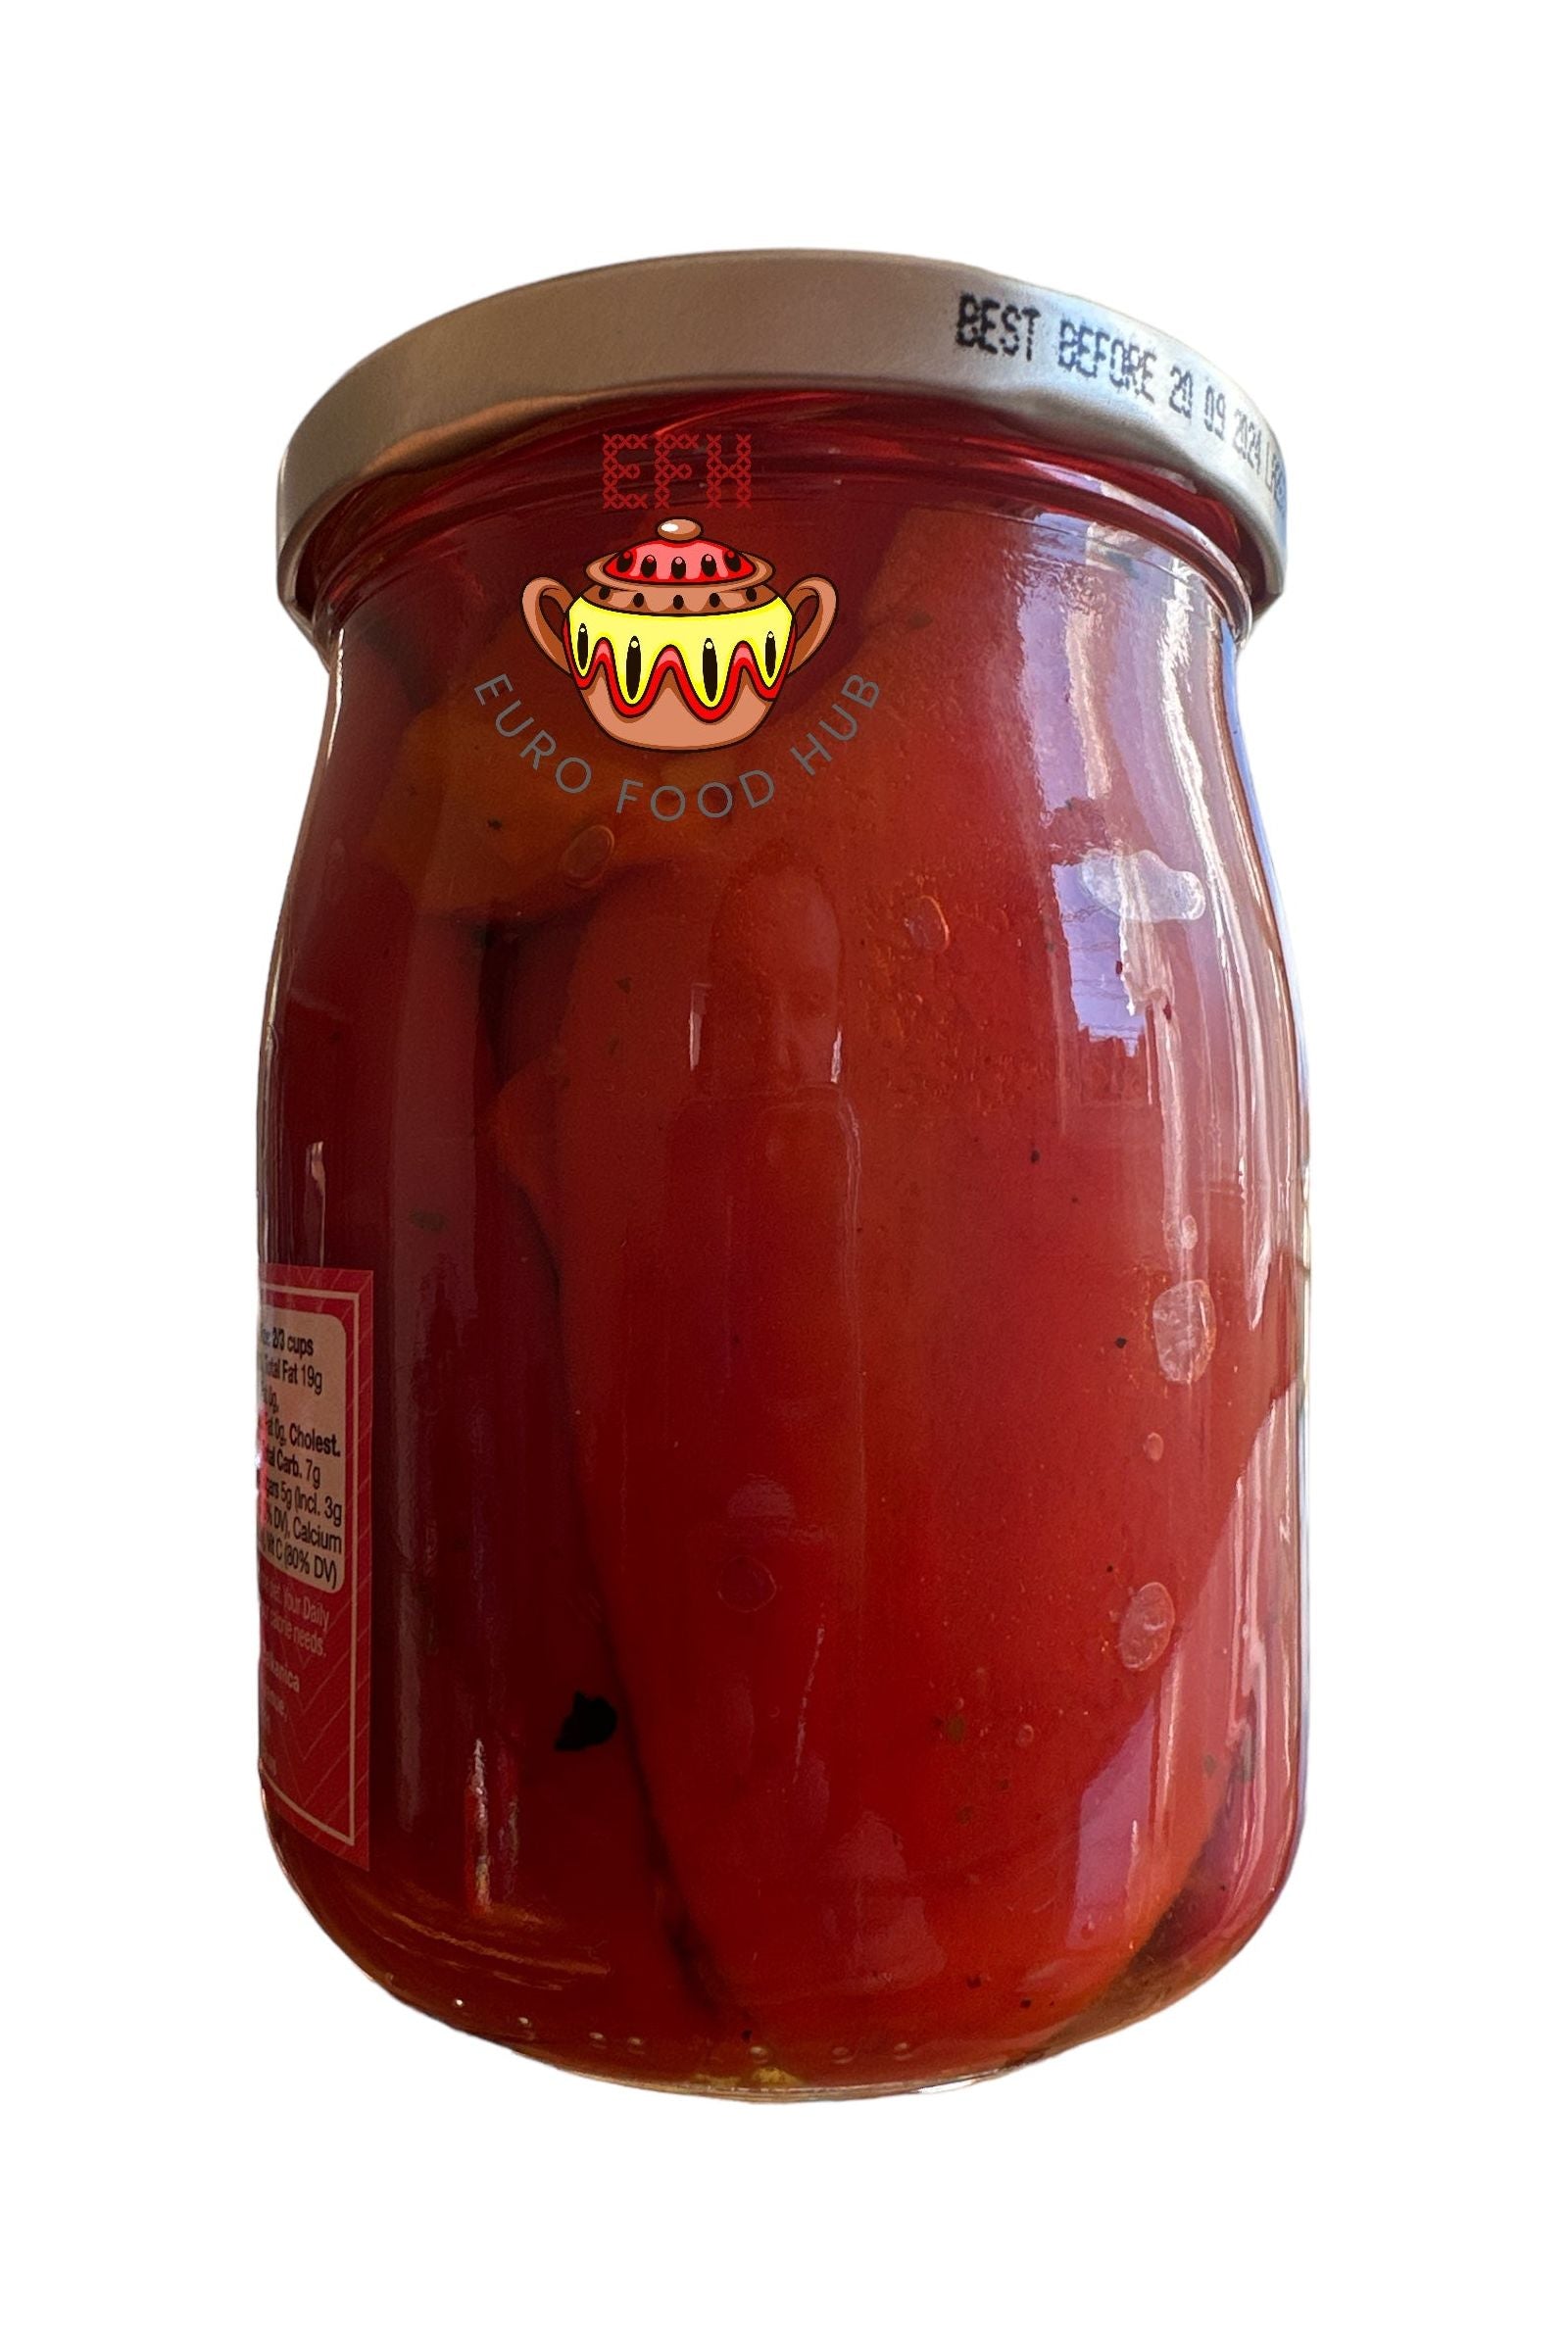 Roasted & Peeled Red Peppers - Balkan Gardens - 550g